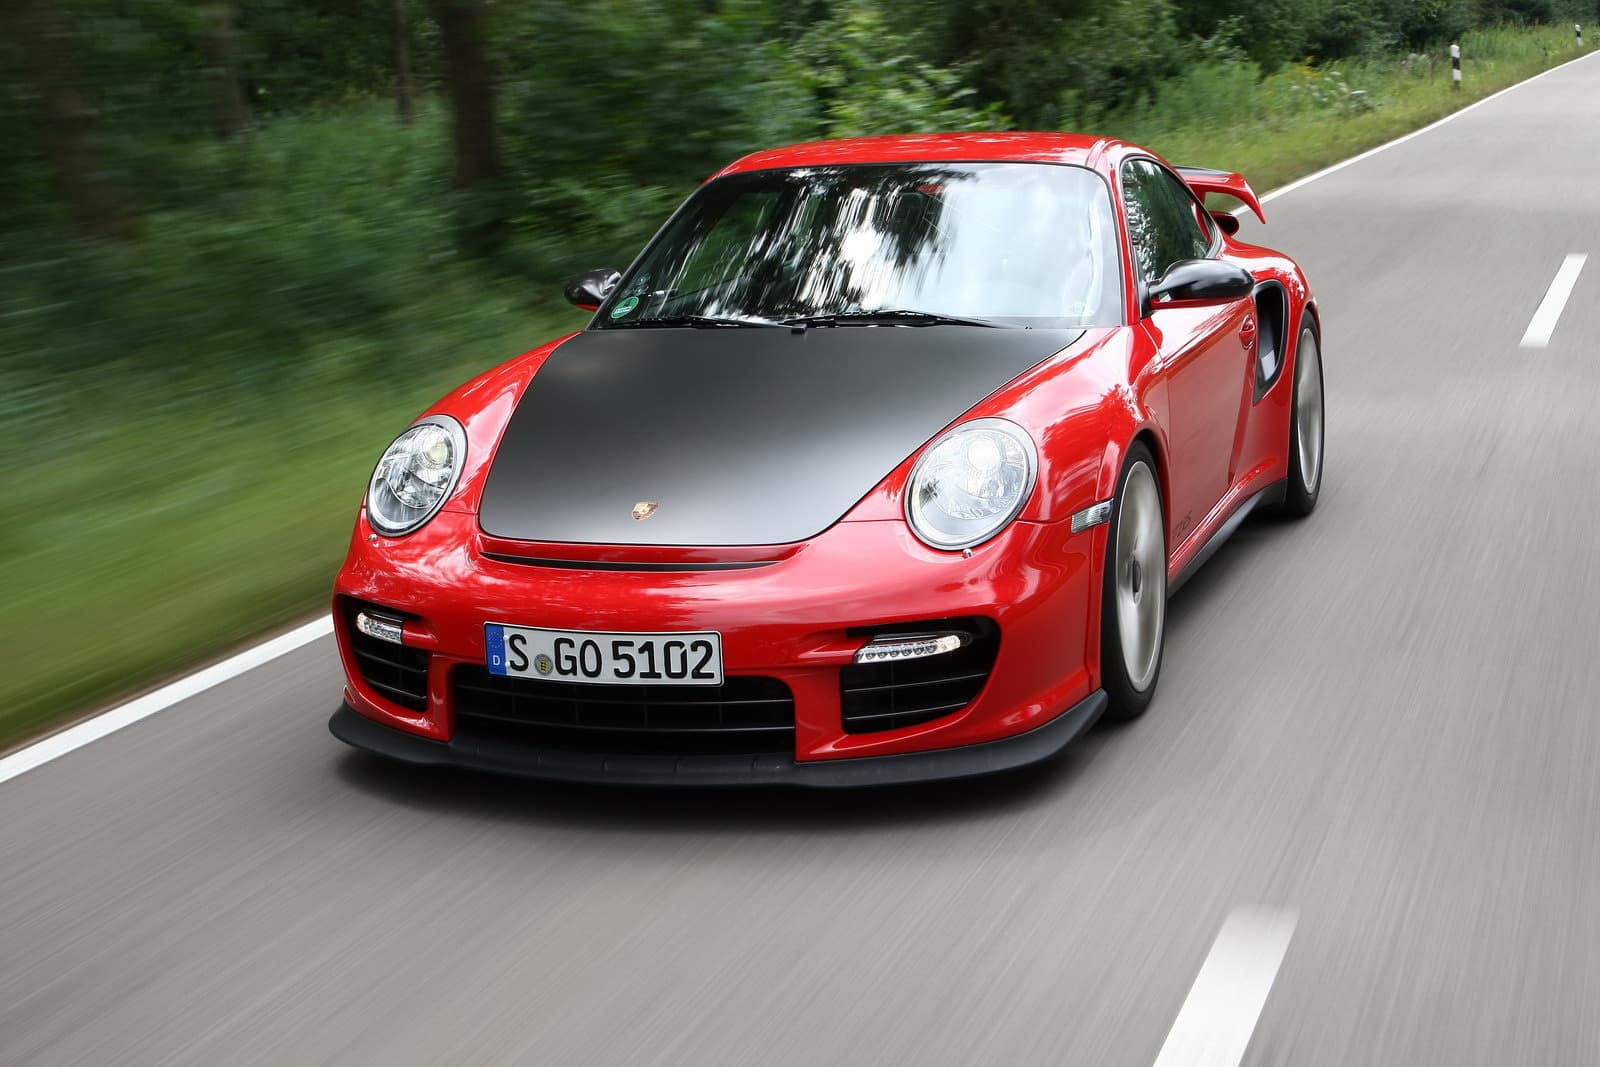 Porsche Special Edition 2011 Bis 2013 Various Series for Selection Cars 